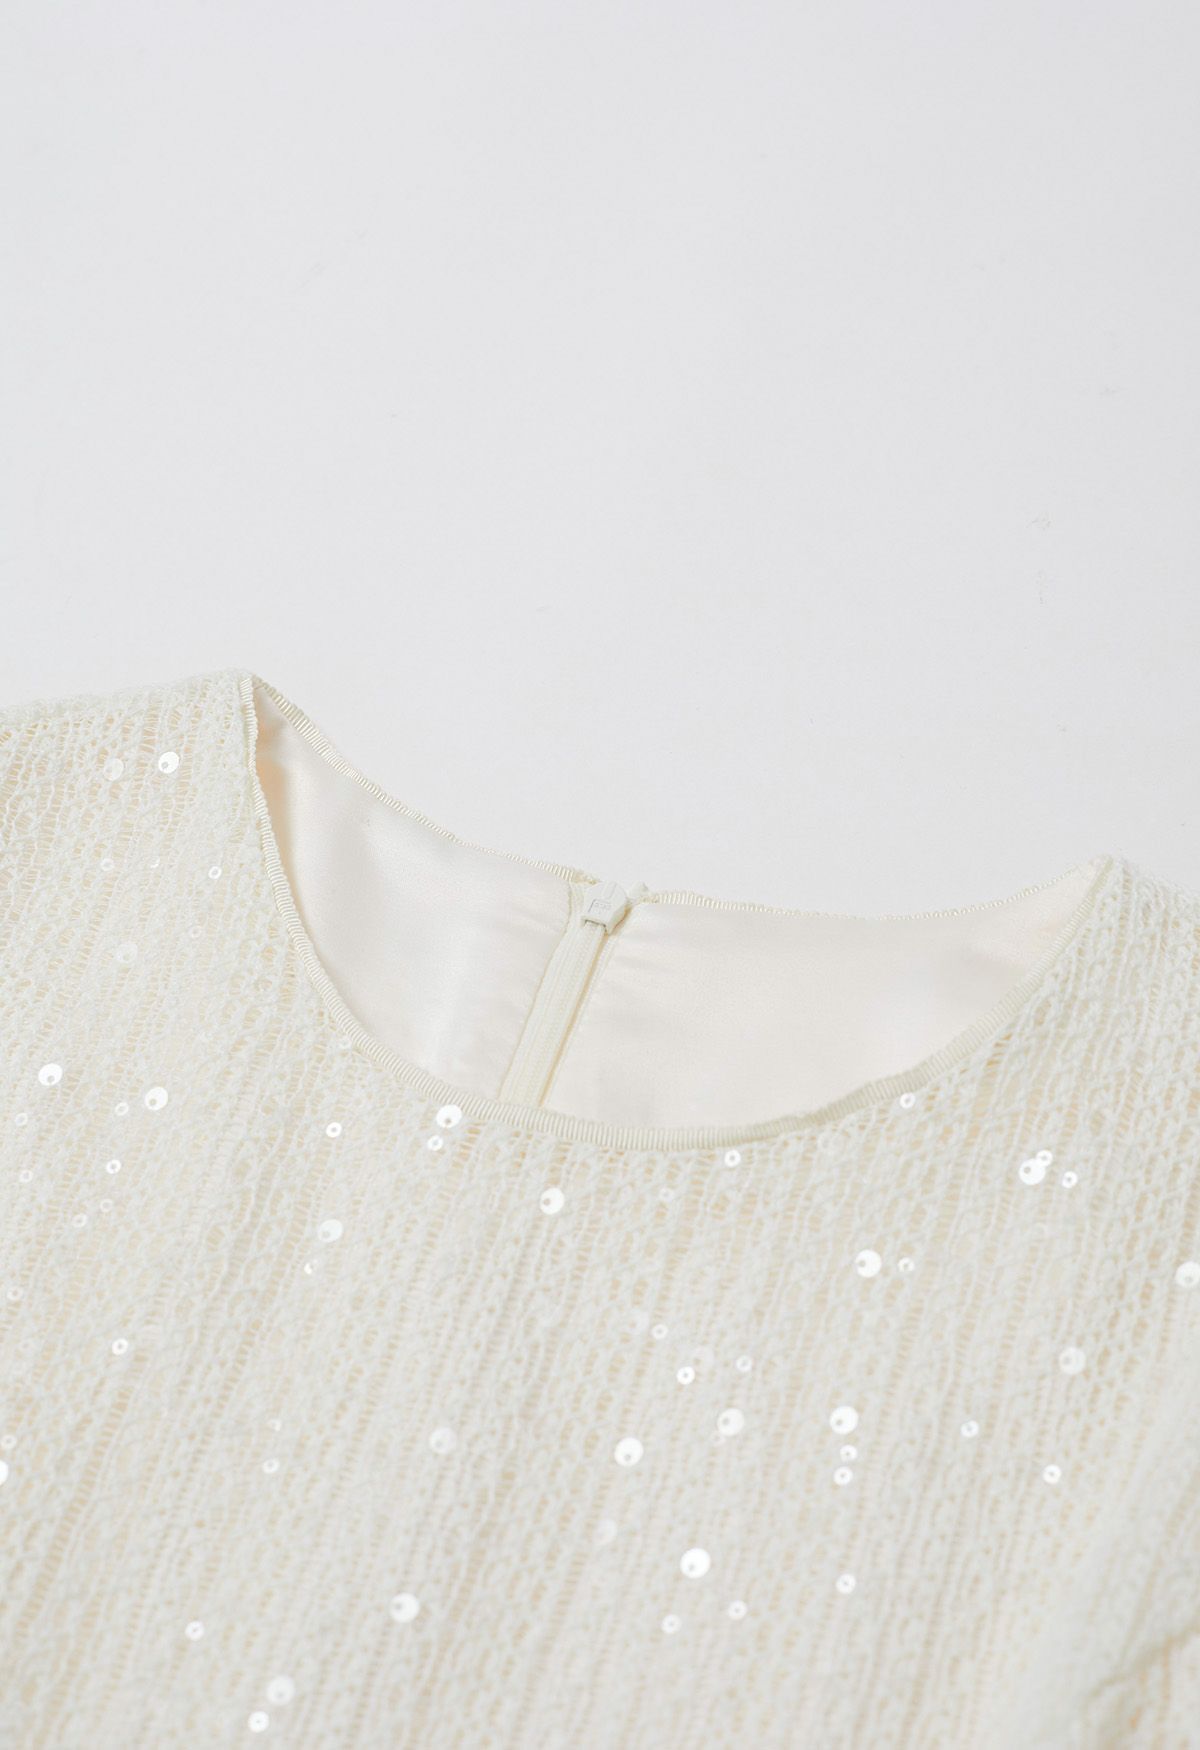 Glitter Sequin Frilling Dress with Choker in Cream